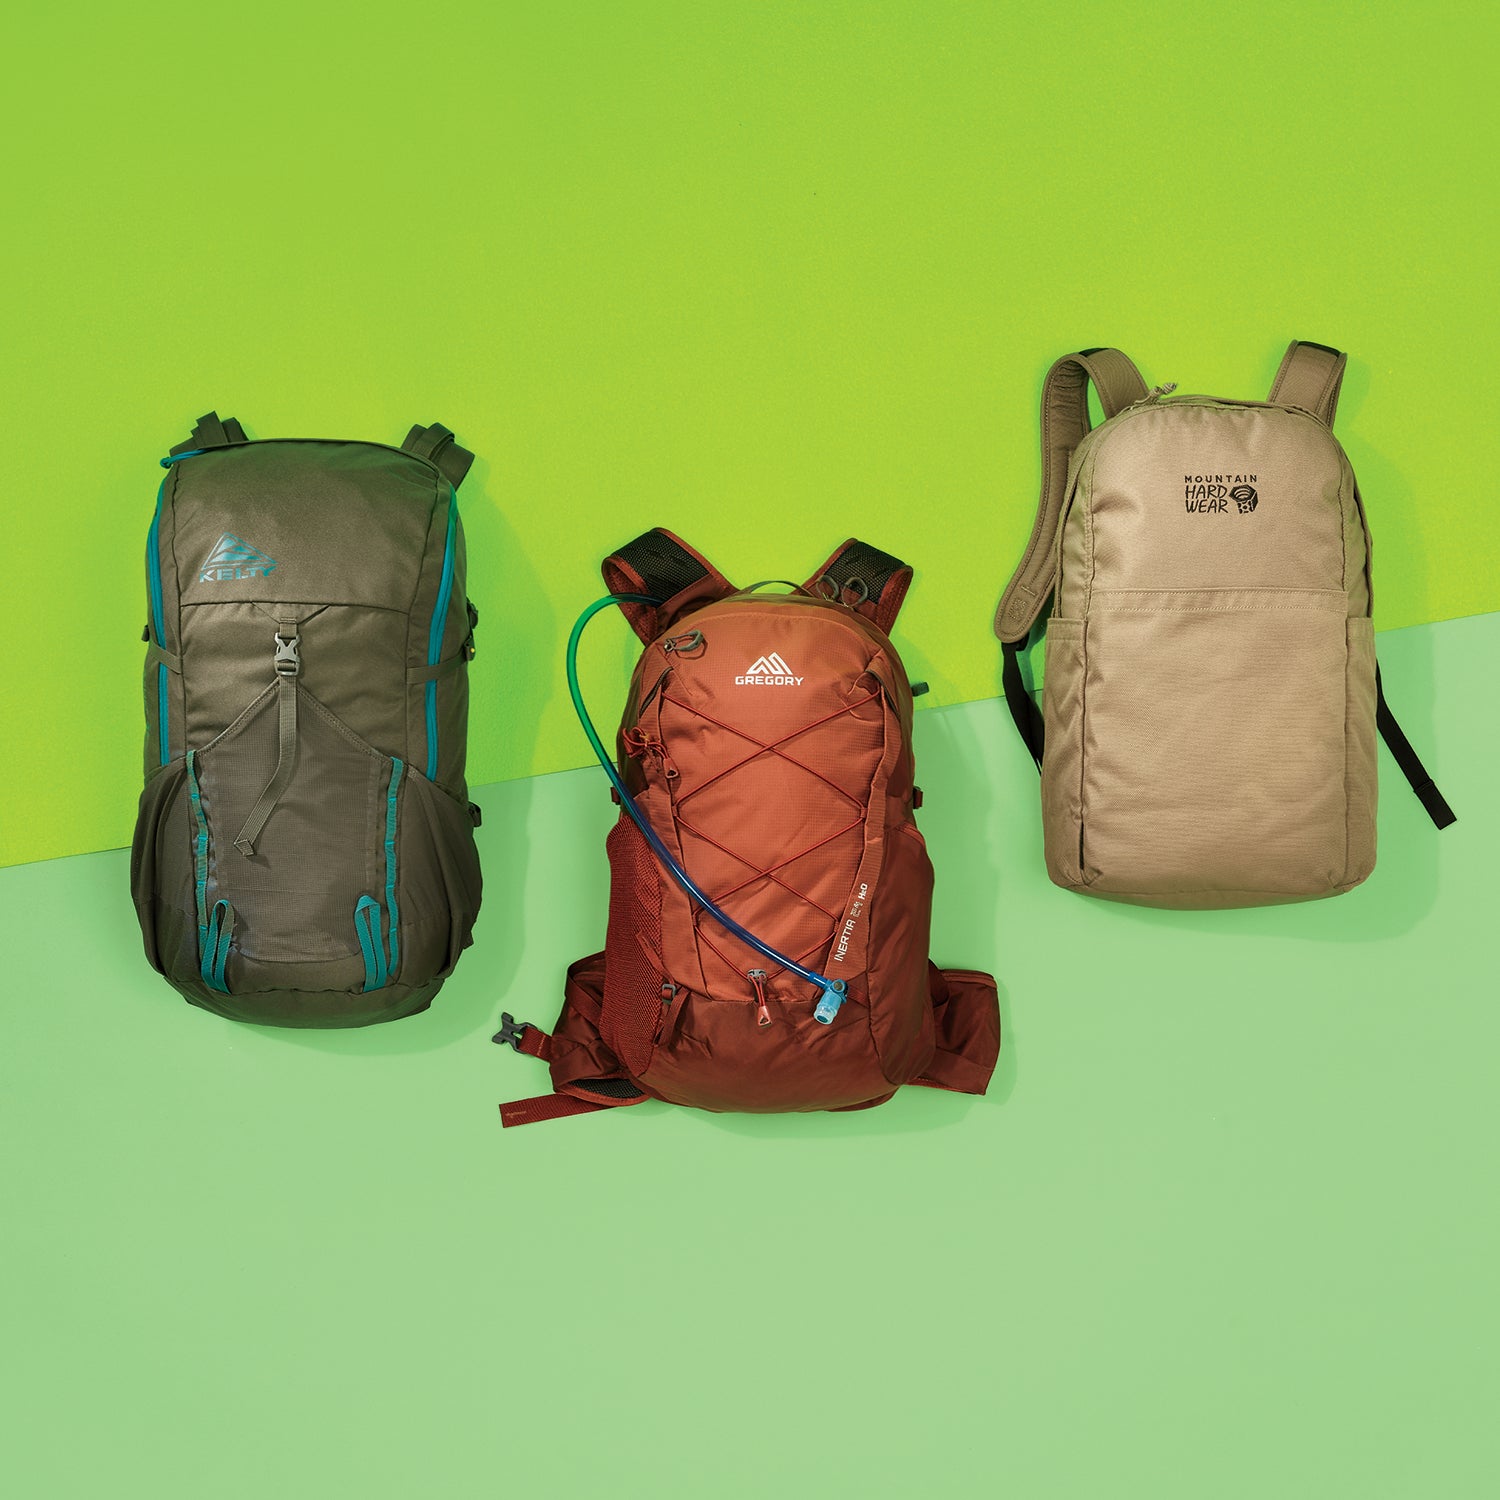 The Best Hiking Backpacks - Top Rated Hiking Bags